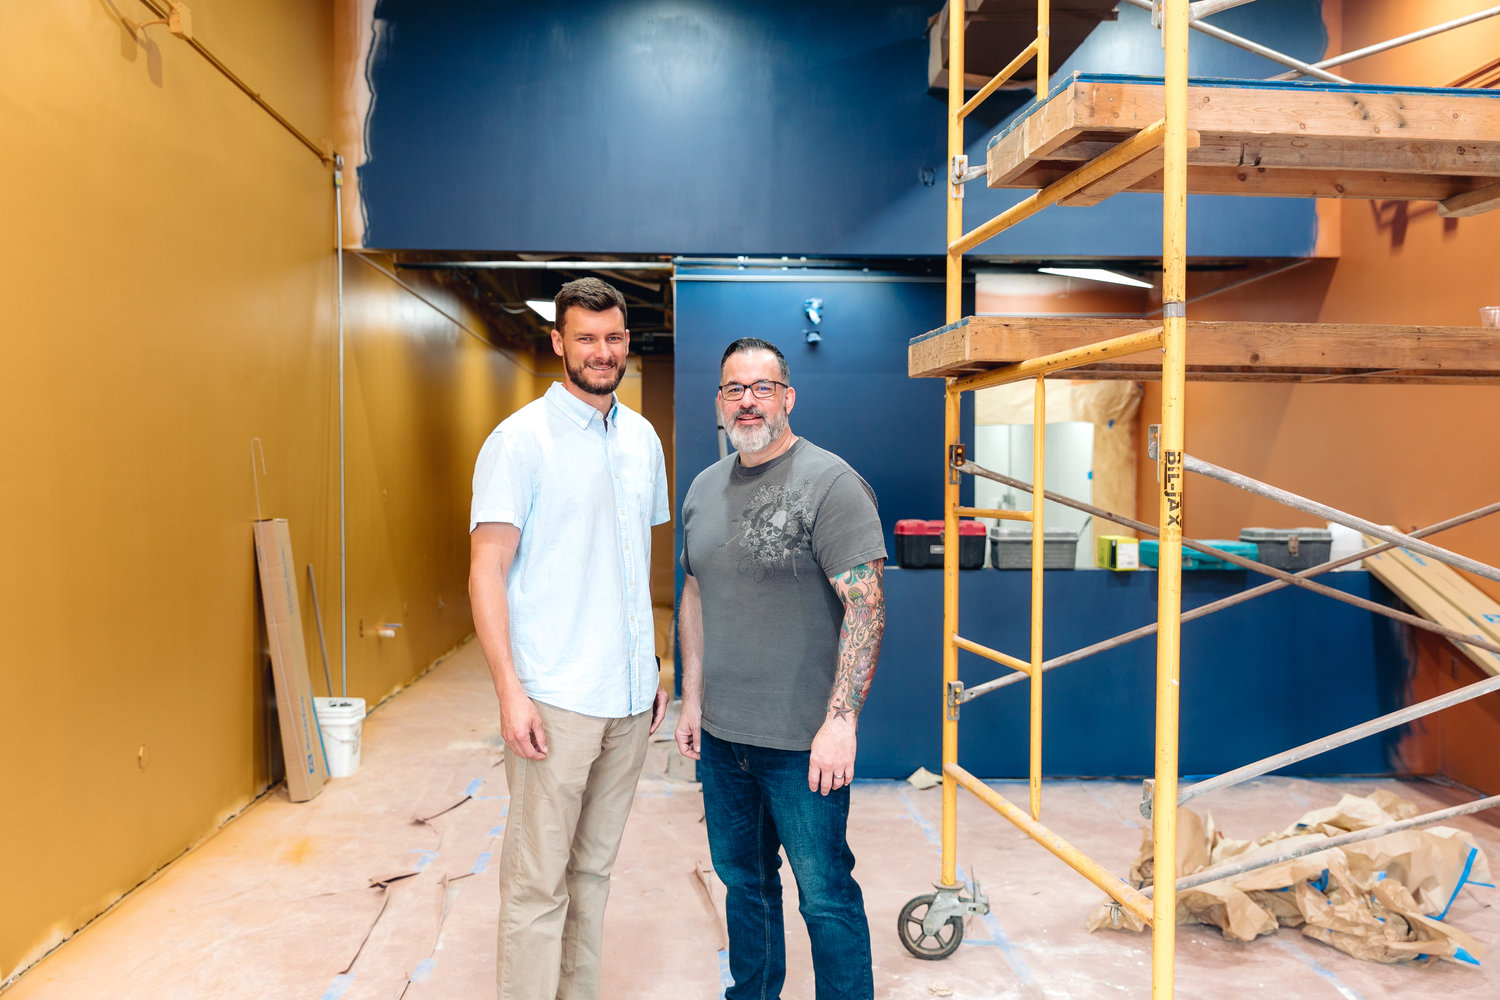 Banter Brewing Co., co-owned by Brian Harbison and Jon Weddle, expects to launch its south Springfield venture in August.